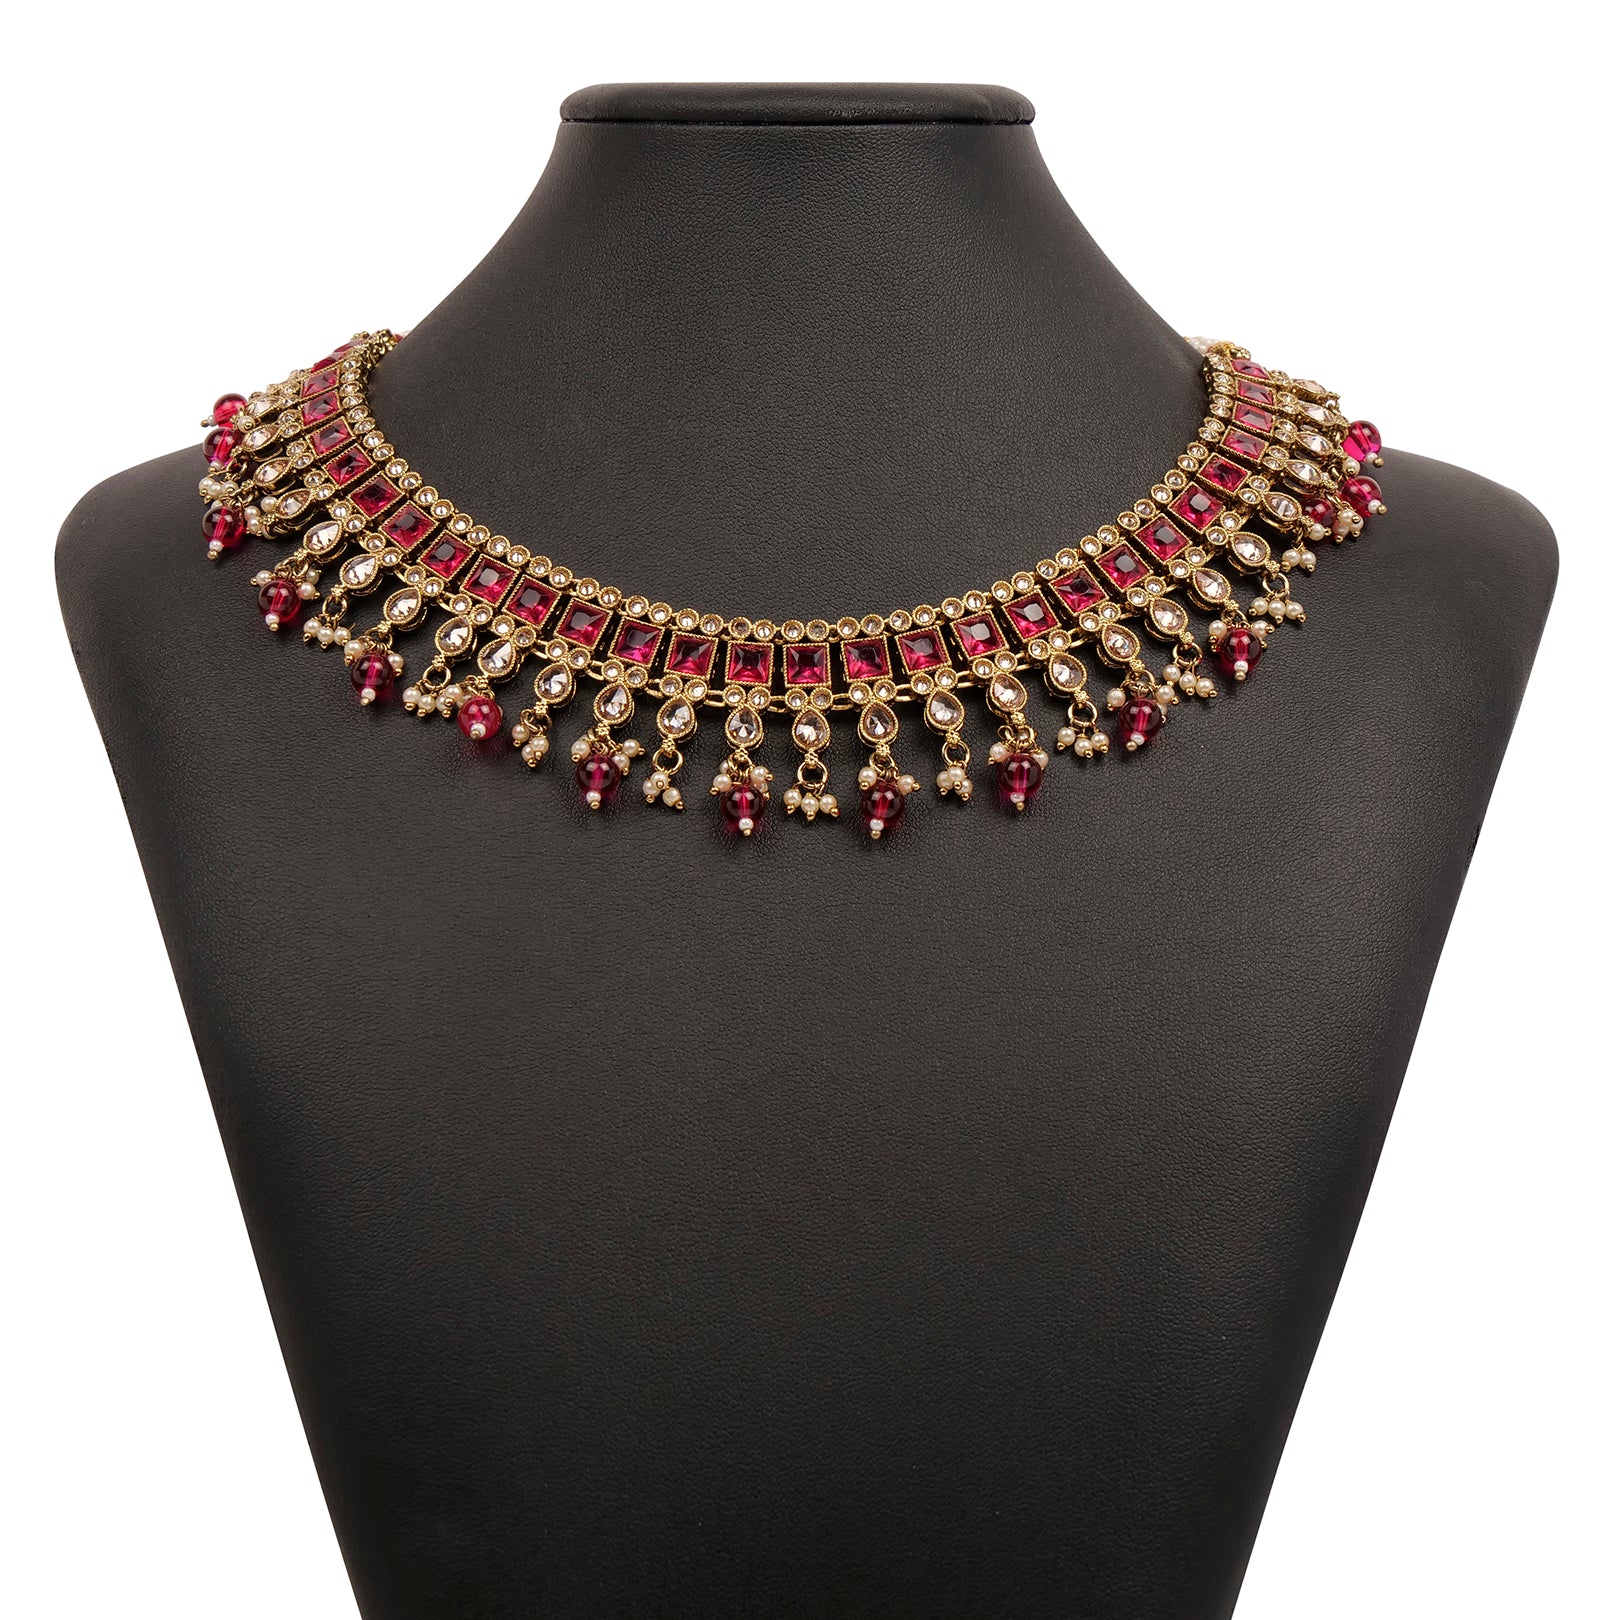 Sana Necklace Set in Hot Pink and Antique Gold